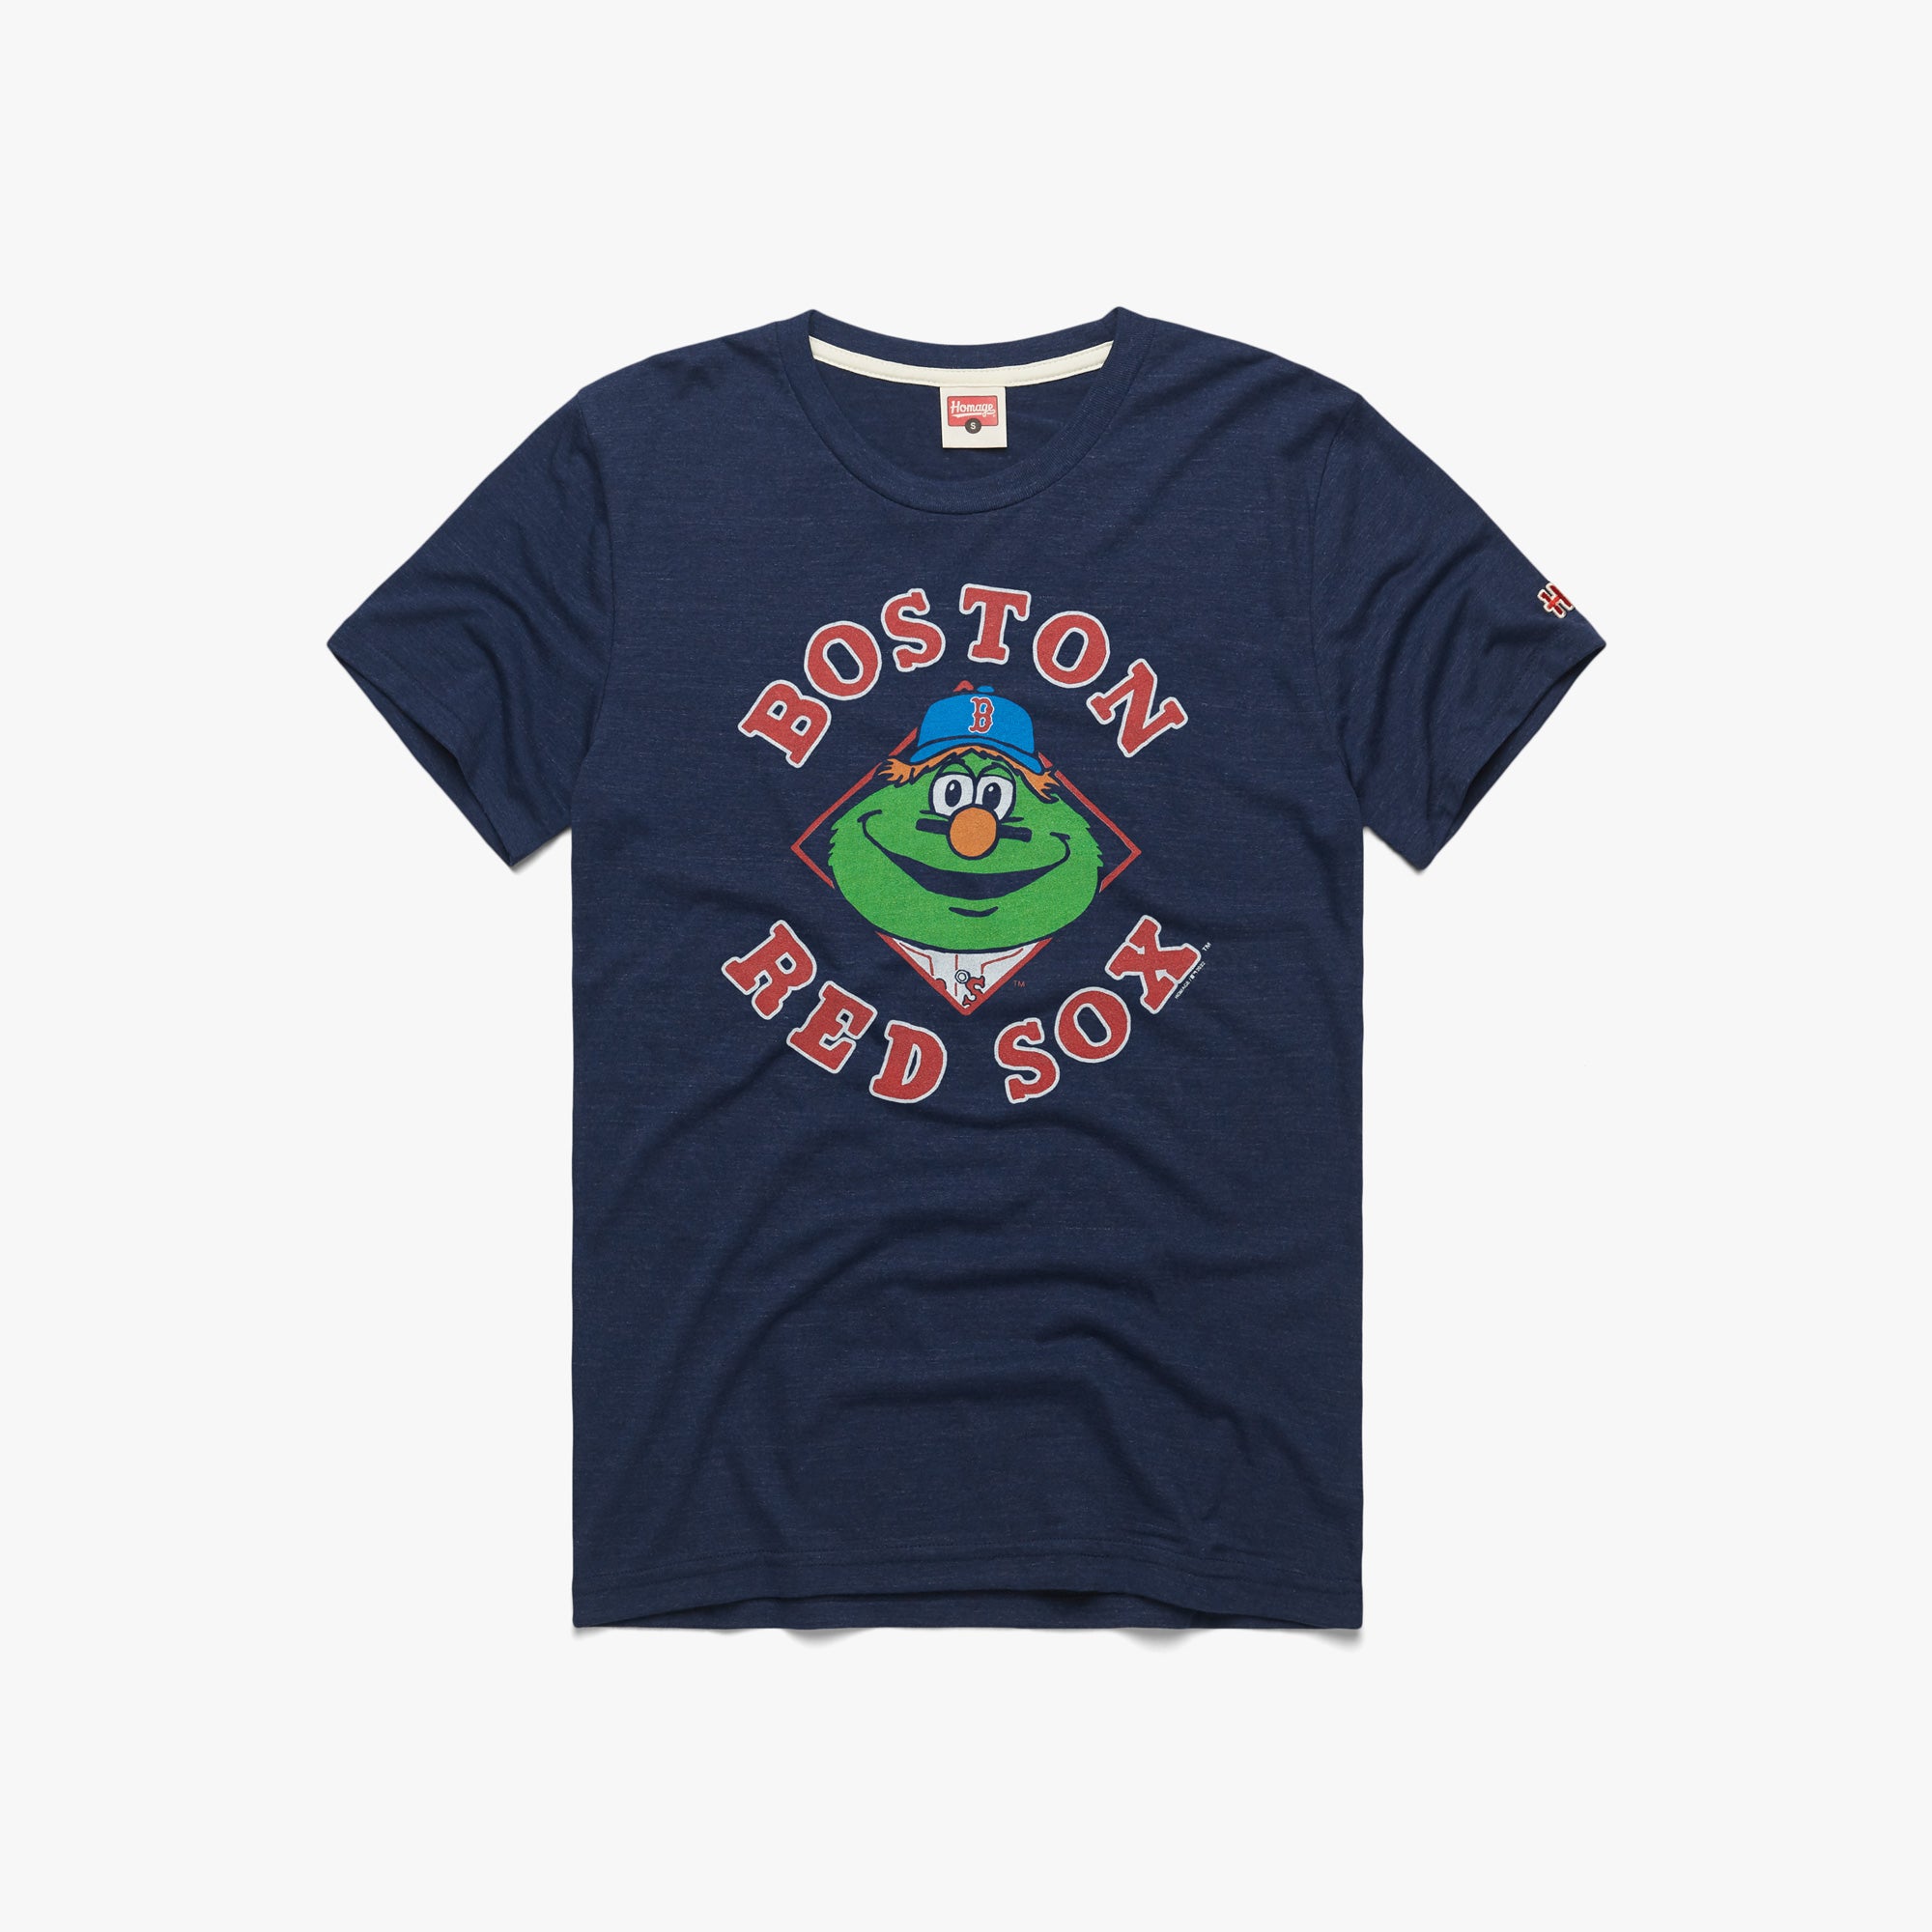 Boston Red Sox Home Of The Green Monster Shirt - High-Quality